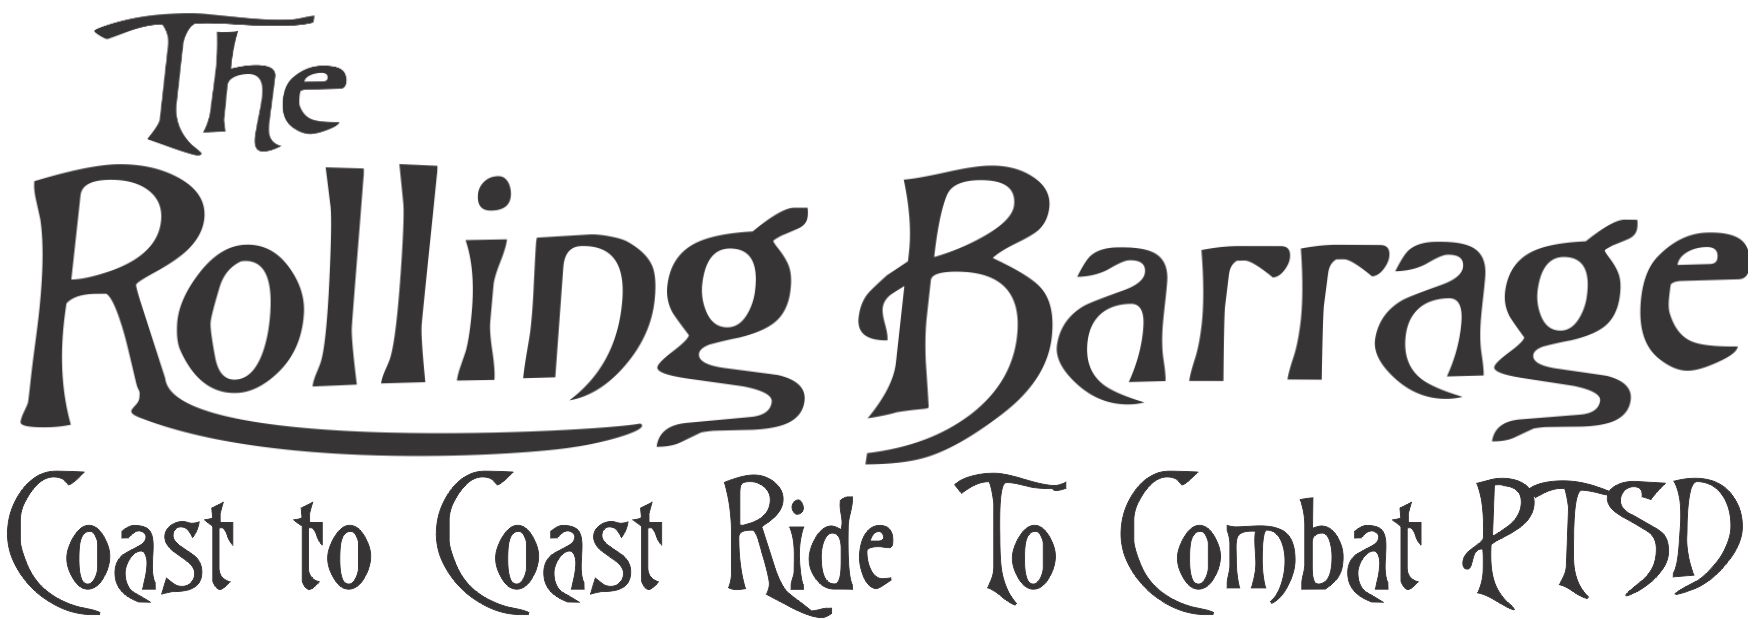 The Rolling Barrage - Coast-to-Coast Ride to Combat PTSD